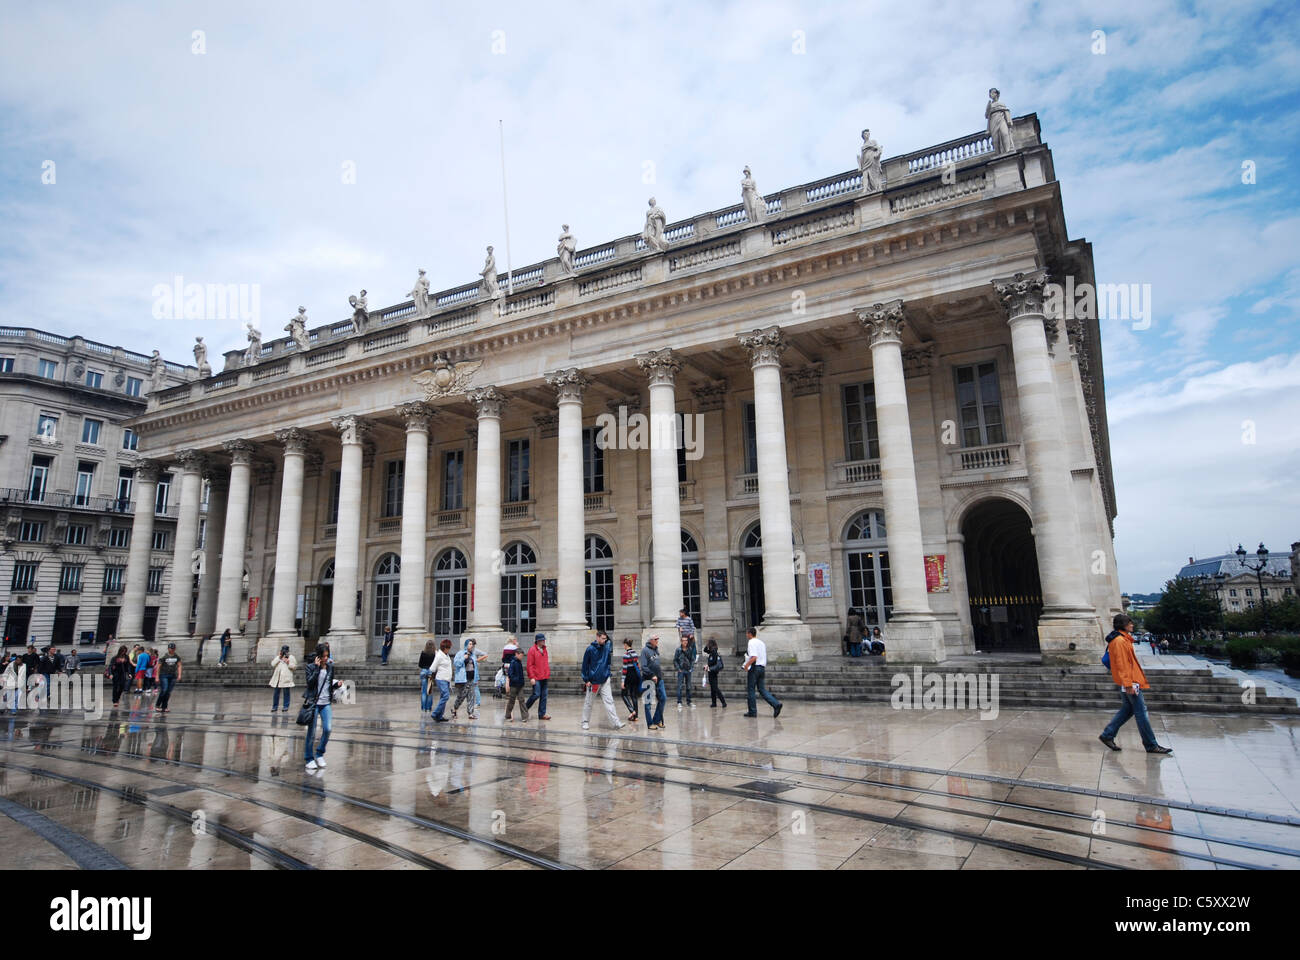 Grand Théâtre de Bordeaux is a theatre in Bordeaux, France. It was designed by the architect Victor Louis and opened in 1780. Stock Photo